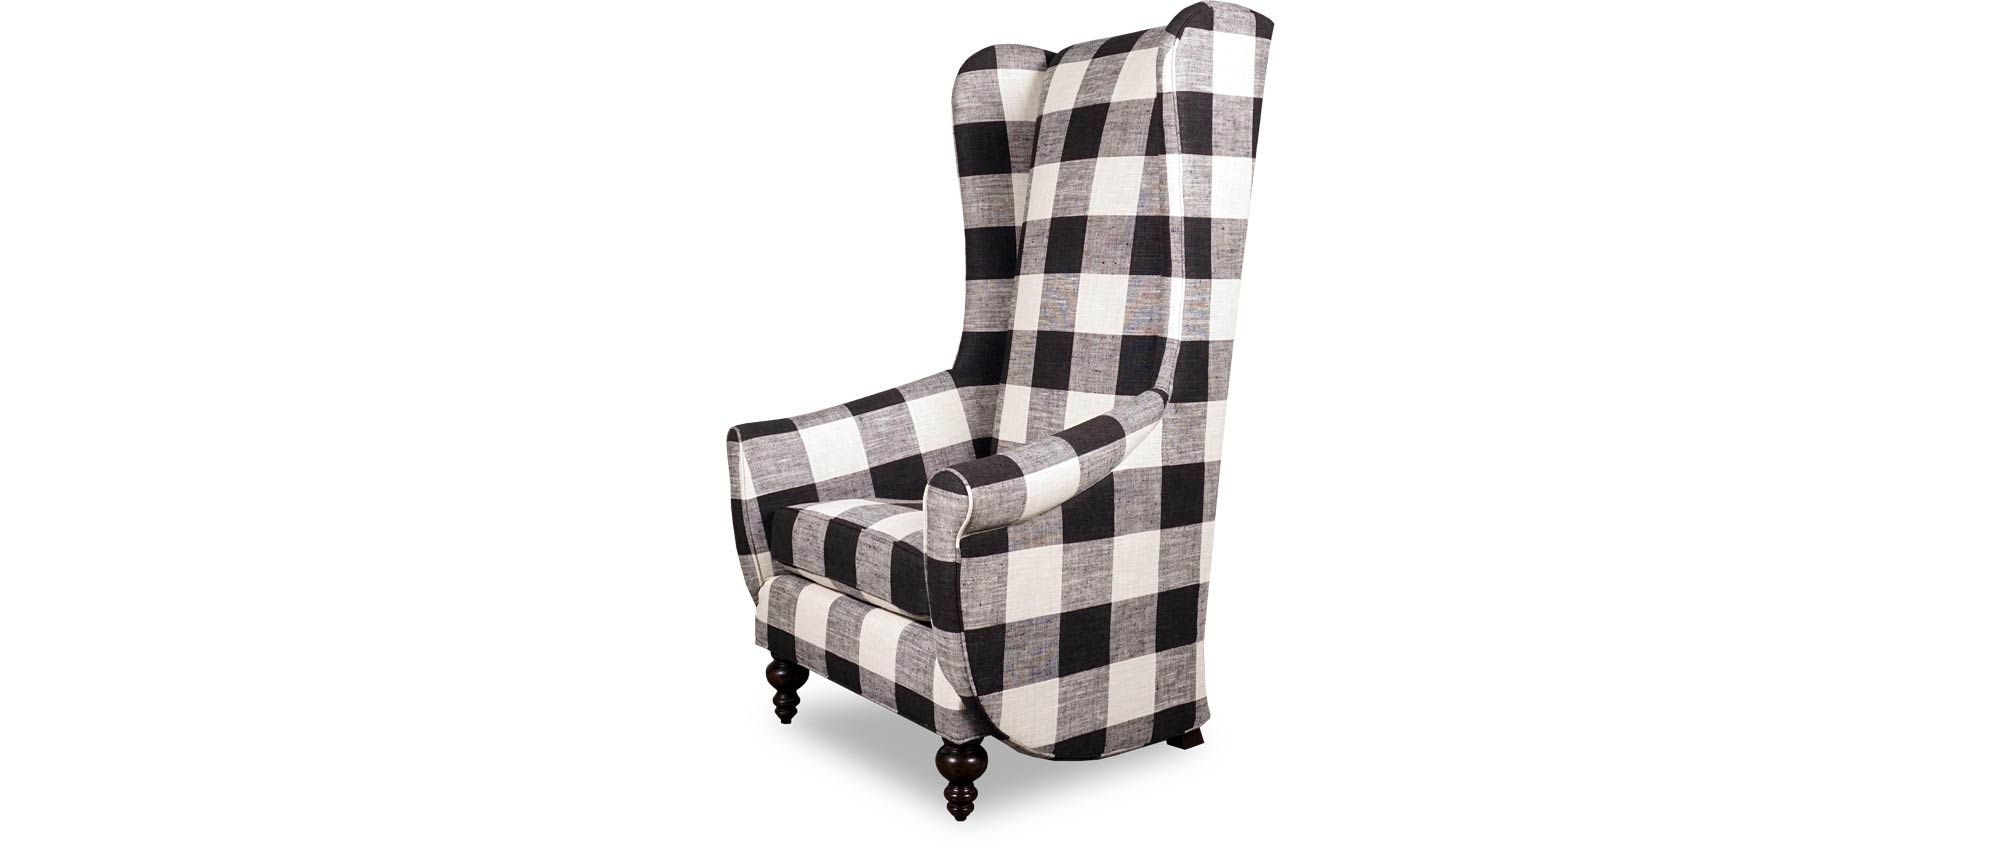 Inspector armchair without tufting in black and white plaid fabric